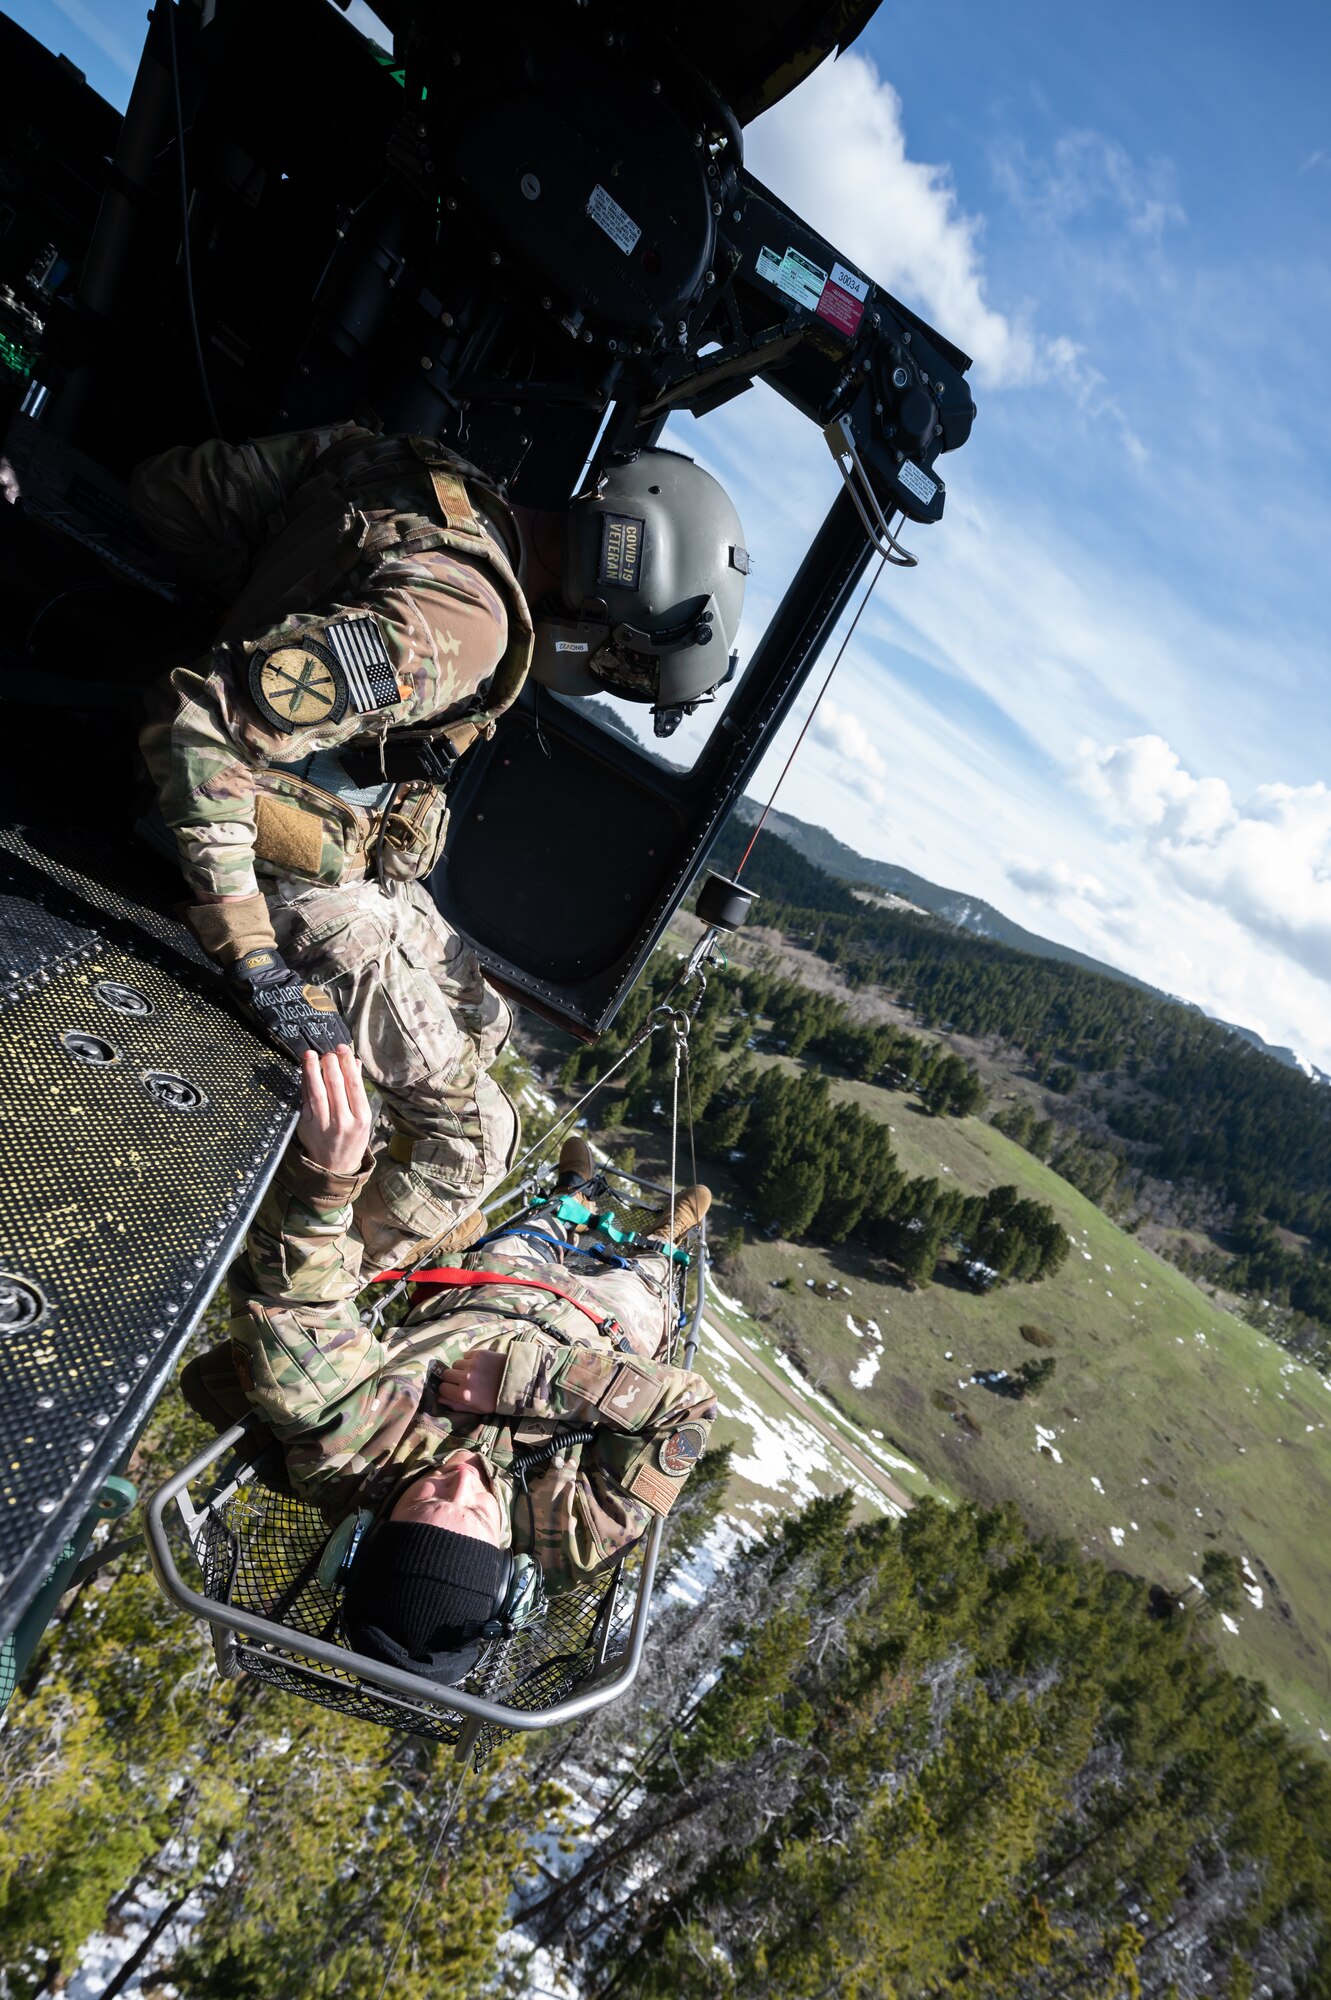 Staff Sgt. Chase Rose, 40th Helicopter Squadron flight engineer, hoists Airman 1st Class Courage Krueger, 341st Contracting Squadron contracting apprentice, into an UH-1N Huey helicopter during a search and rescue exercise May 24, 2022, over the Highwood Mountains near Great Falls, Mont.